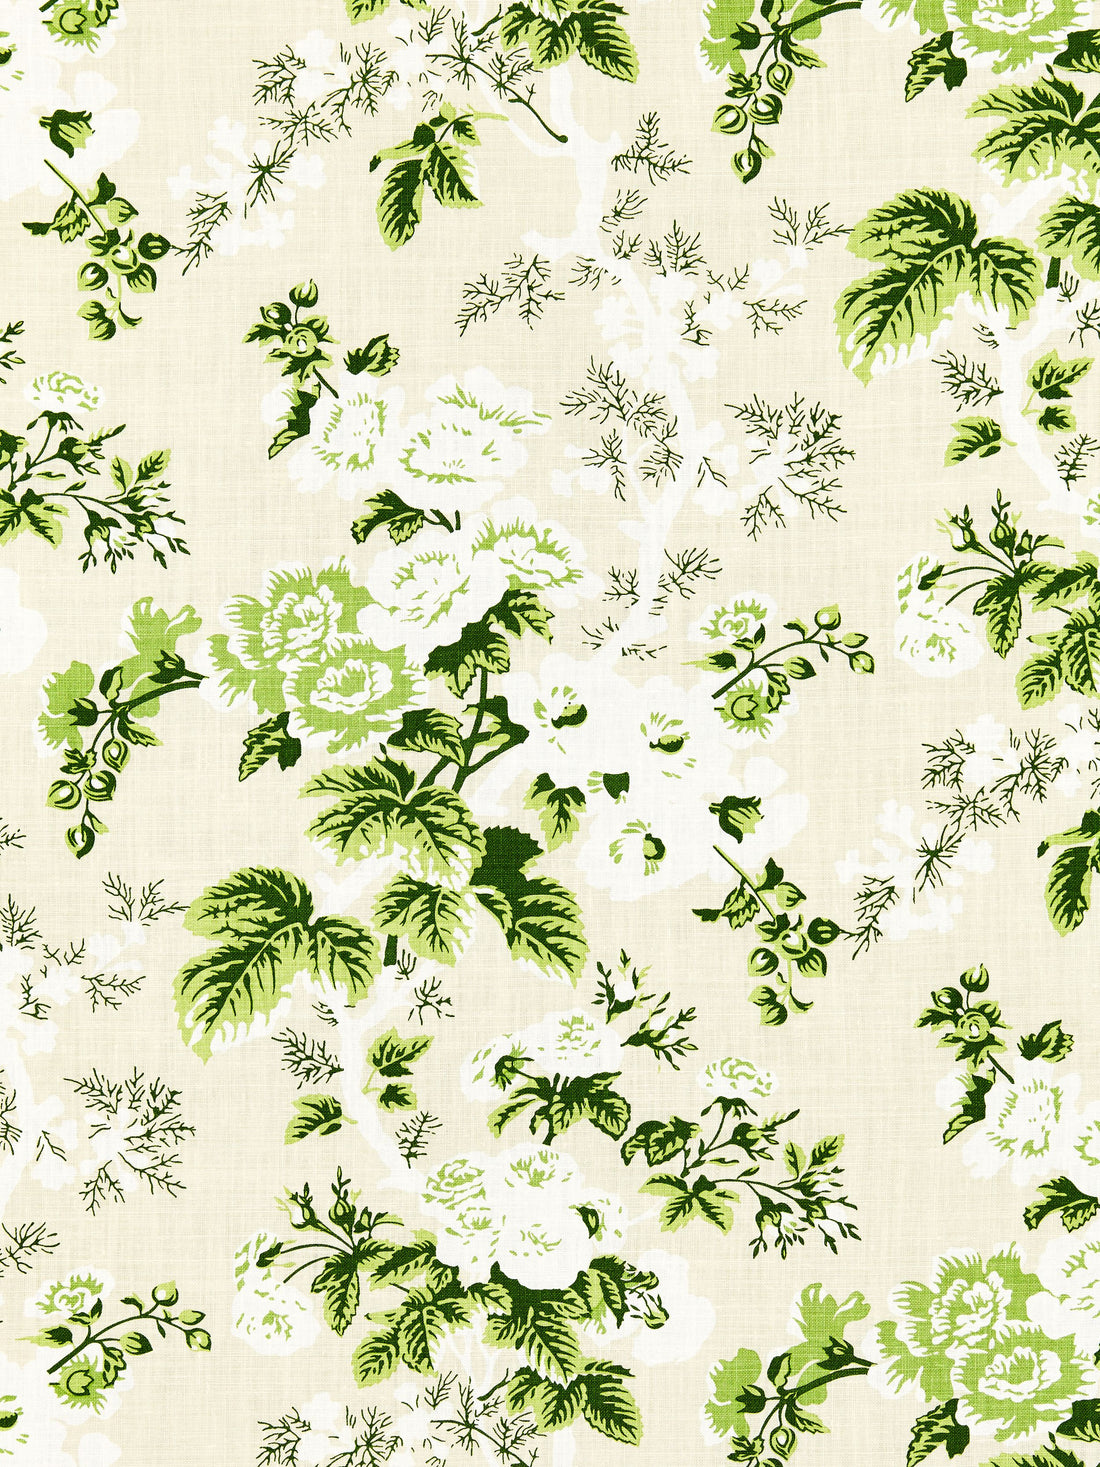 Ascot Linen Print fabric in verdure color - pattern number SC 000116602 - by Scalamandre in the Scalamandre Fabrics Book 1 collection